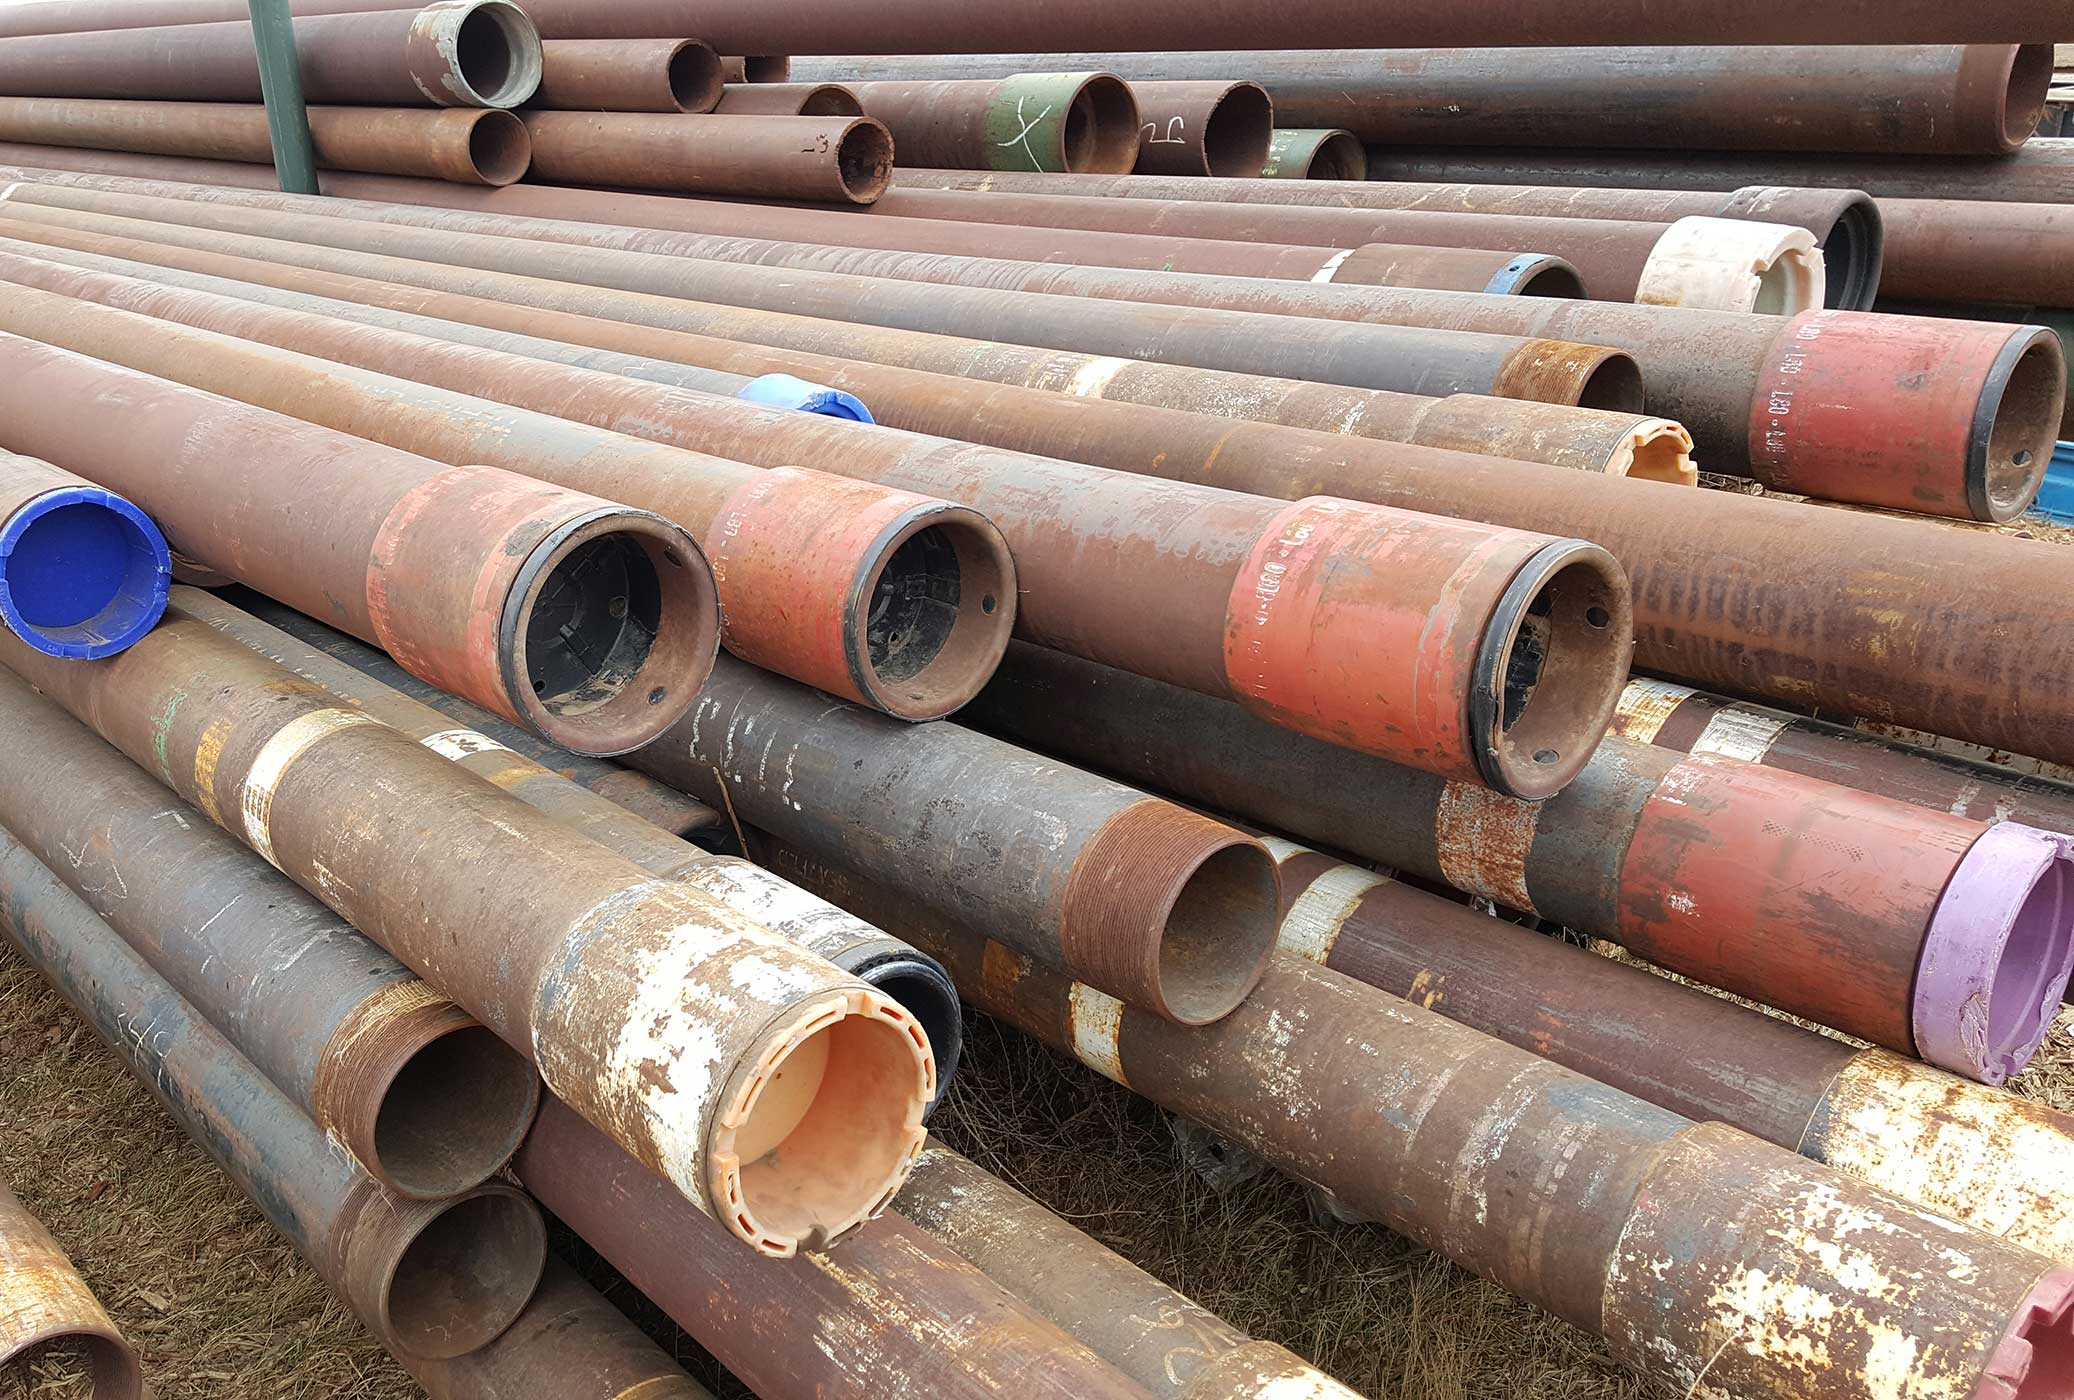 Williston Pipe and Casing